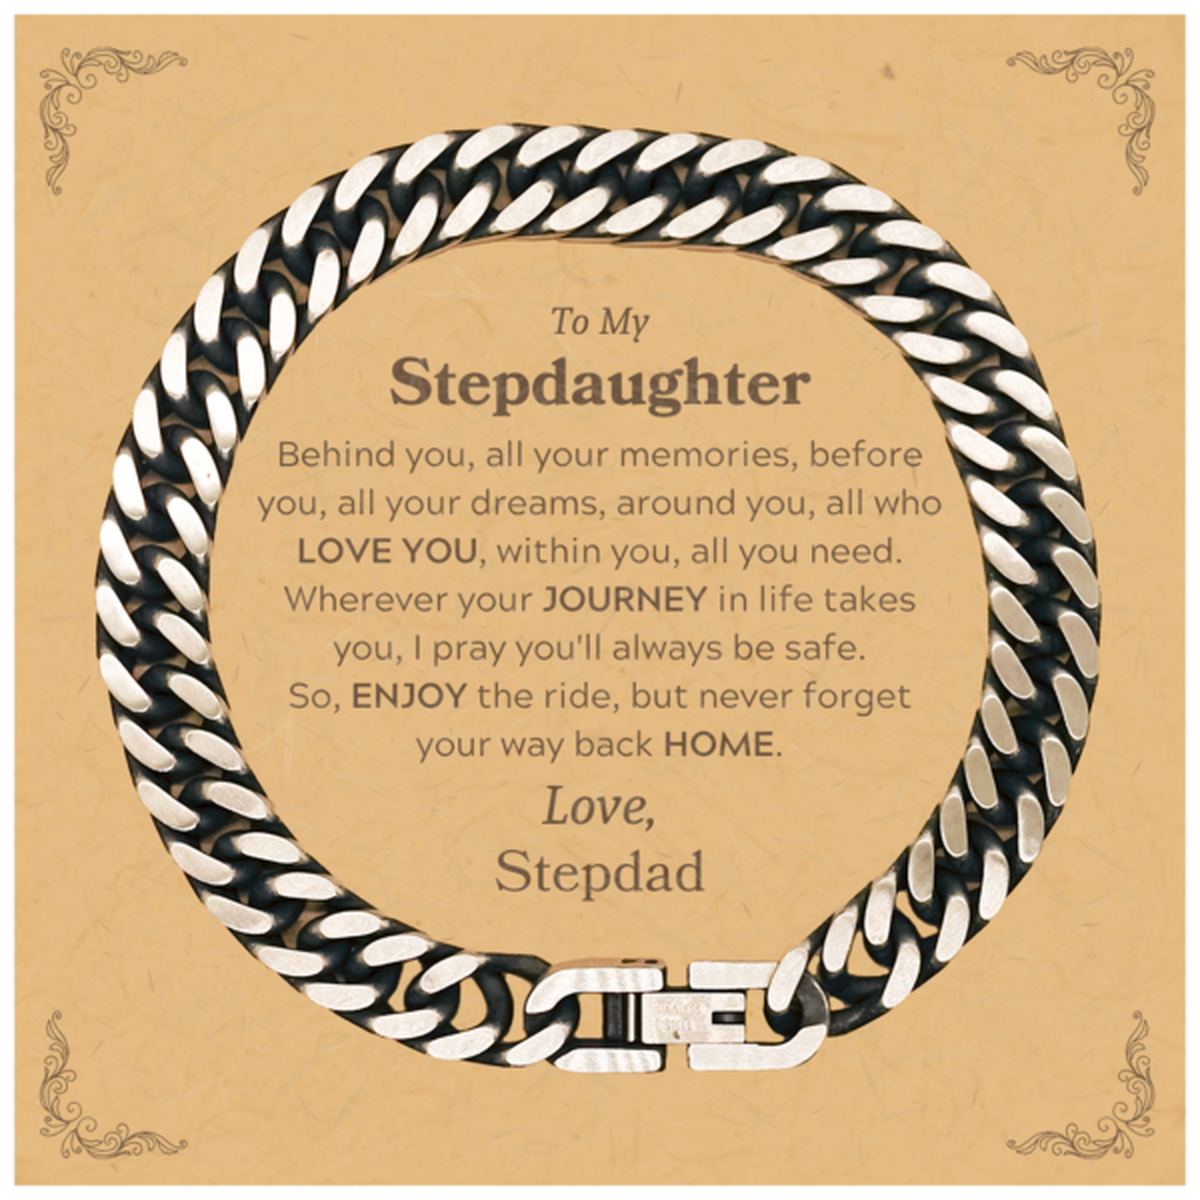 To My Stepdaughter Graduation Gifts from Stepdad, Stepdaughter Cuban Link Chain Bracelet Christmas Birthday Gifts for Stepdaughter Behind you, all your memories, before you, all your dreams. Love, Stepdad